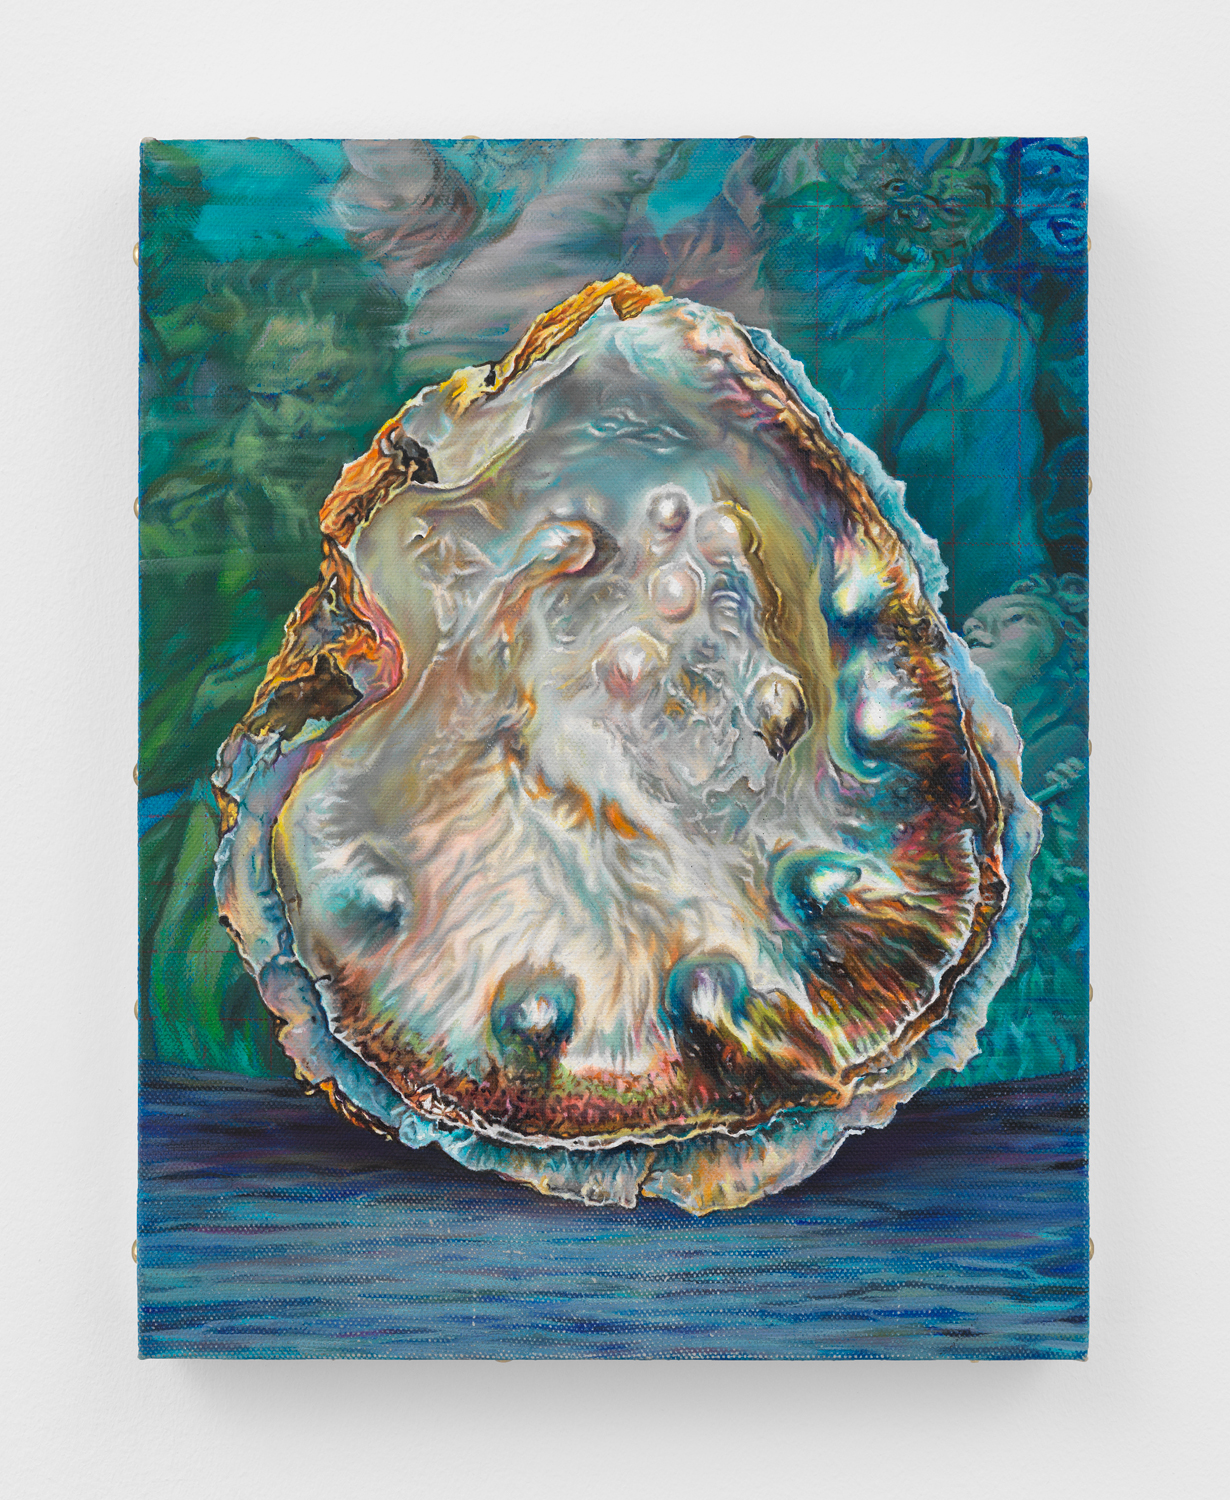 Chason Matthams, Oyster Shell w/ Anthony Van Dyck's Drunken Silenus supported by Satyrs (blue), 2023, Oil on linen over panel, 18 x 14 in.